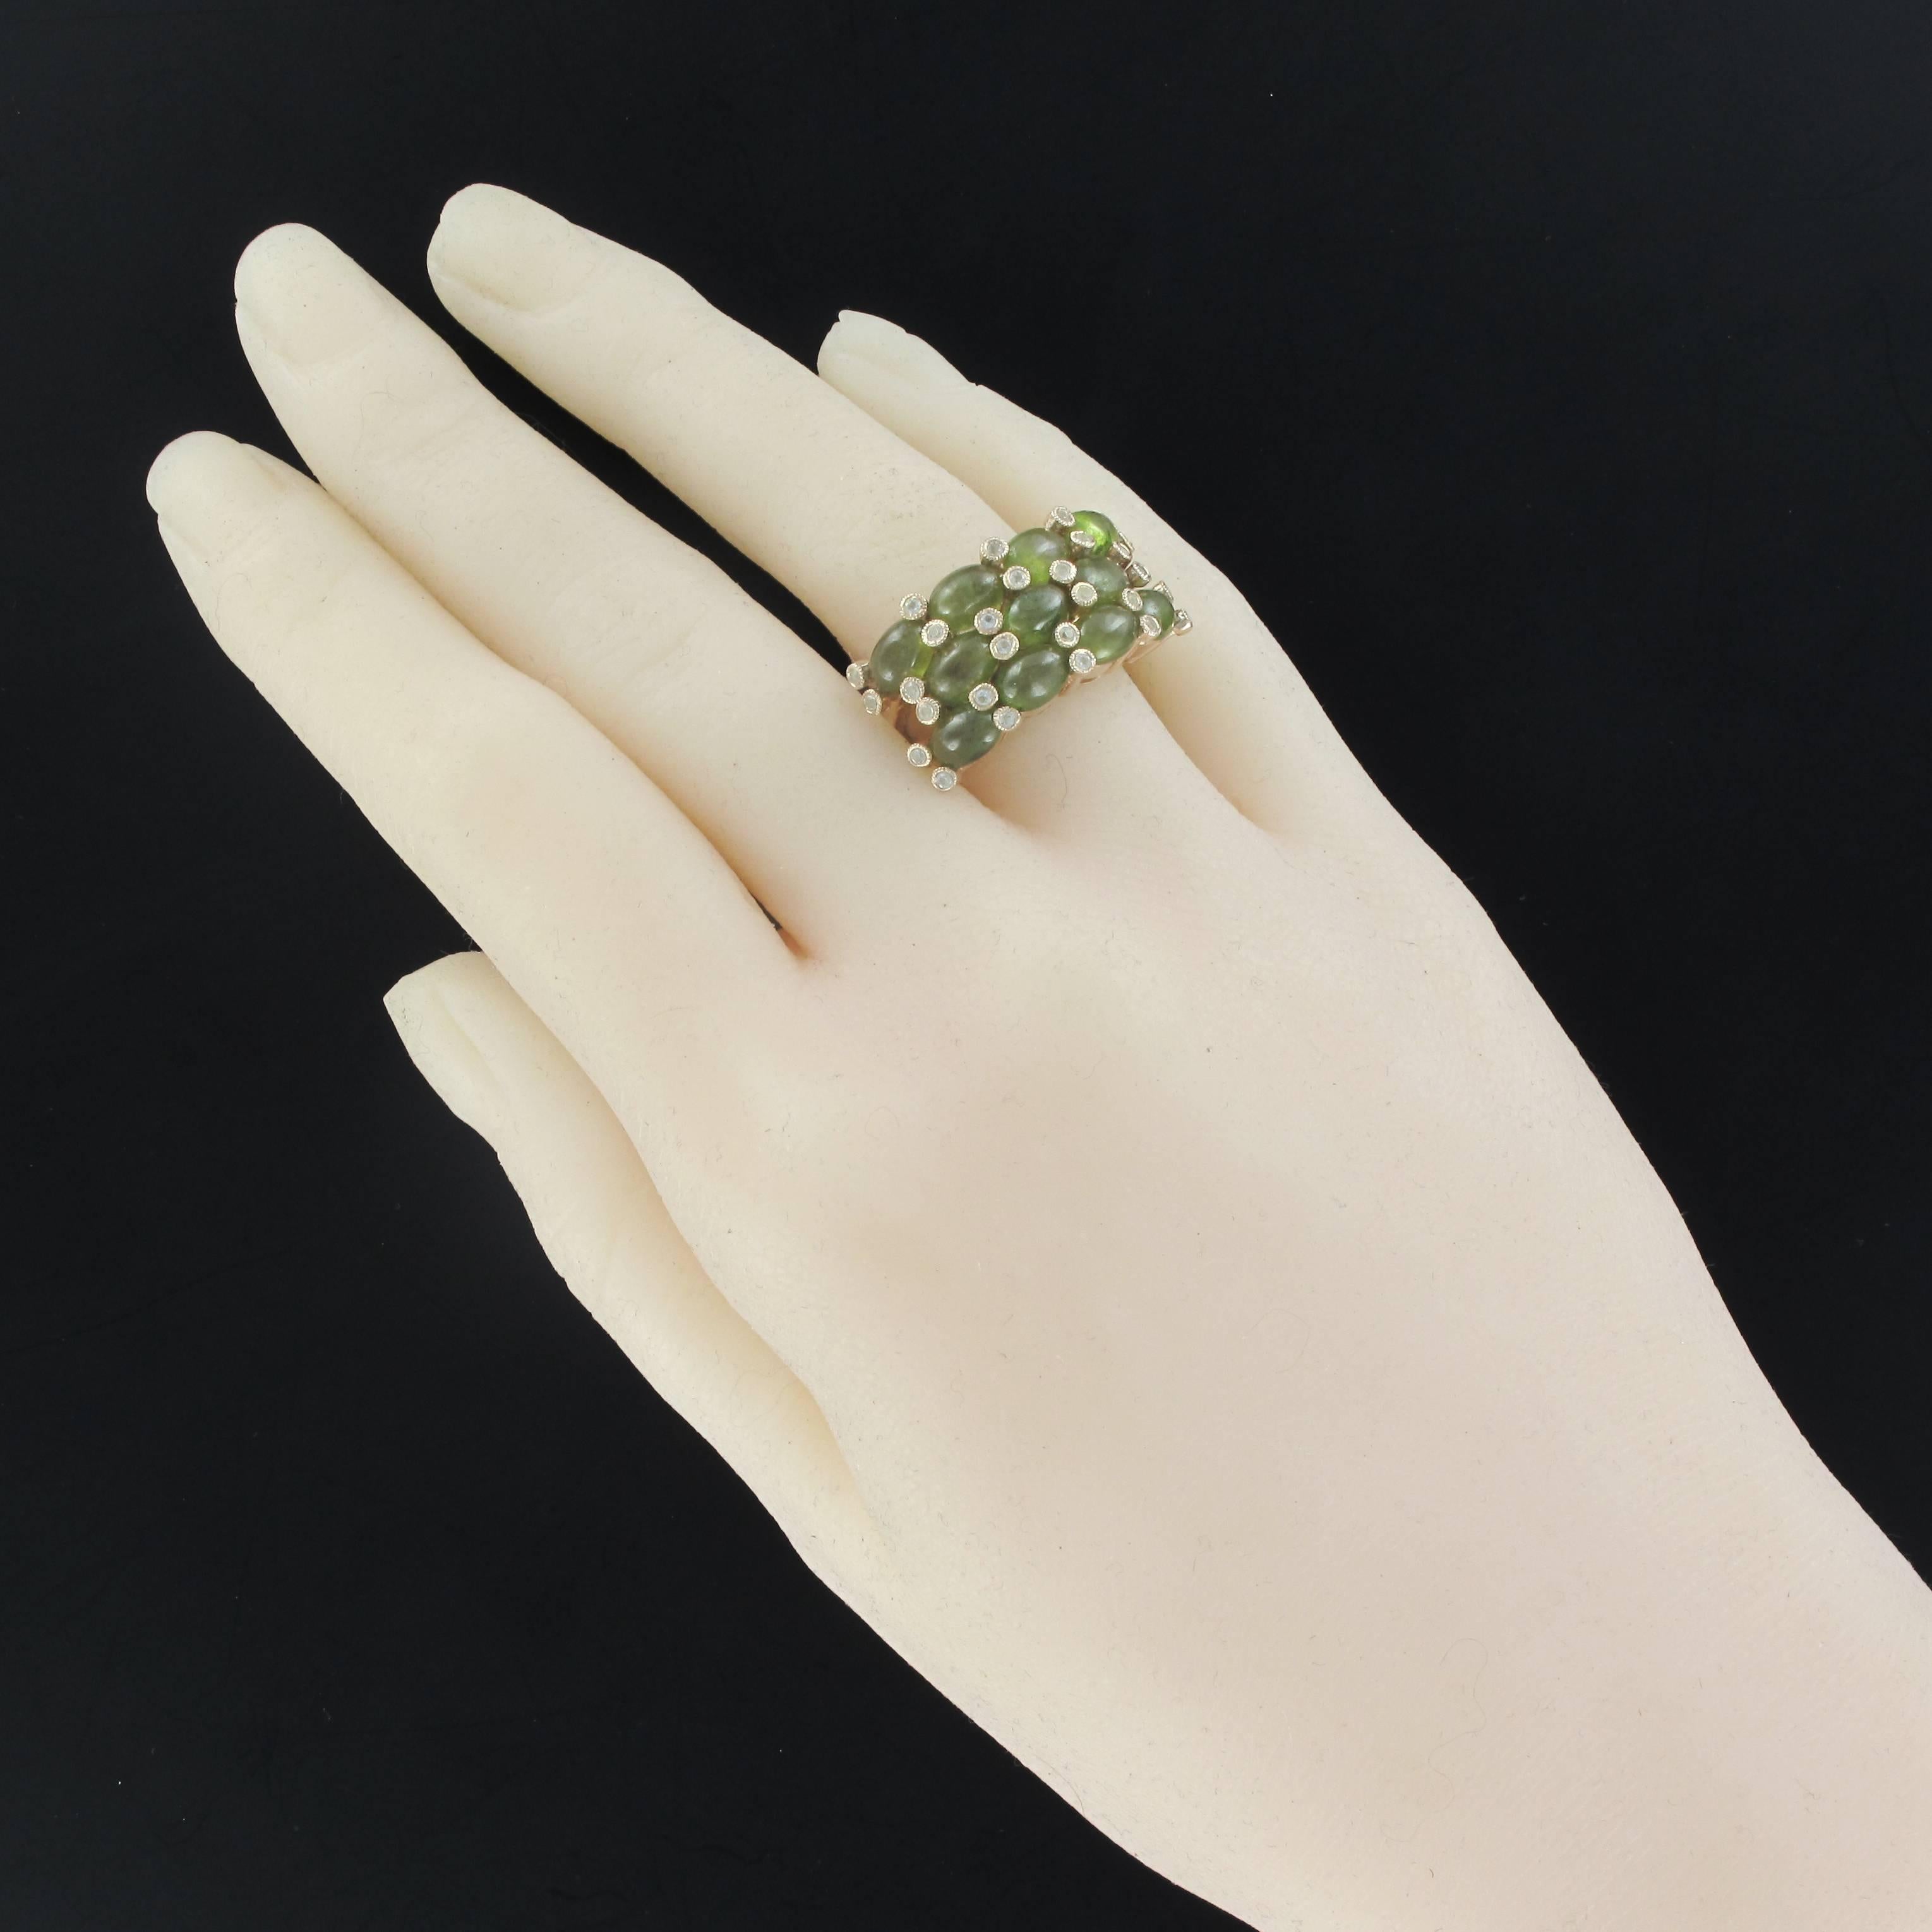 Ring in silver, 925.
This splendid ring is set on its top with 3 lines of green oval cabochon sapphires separated by white topazes set with millegrains. Set are rhodium plated rose gold.
Gemstone weight: Green sapphires: approximately 8.20 carats,